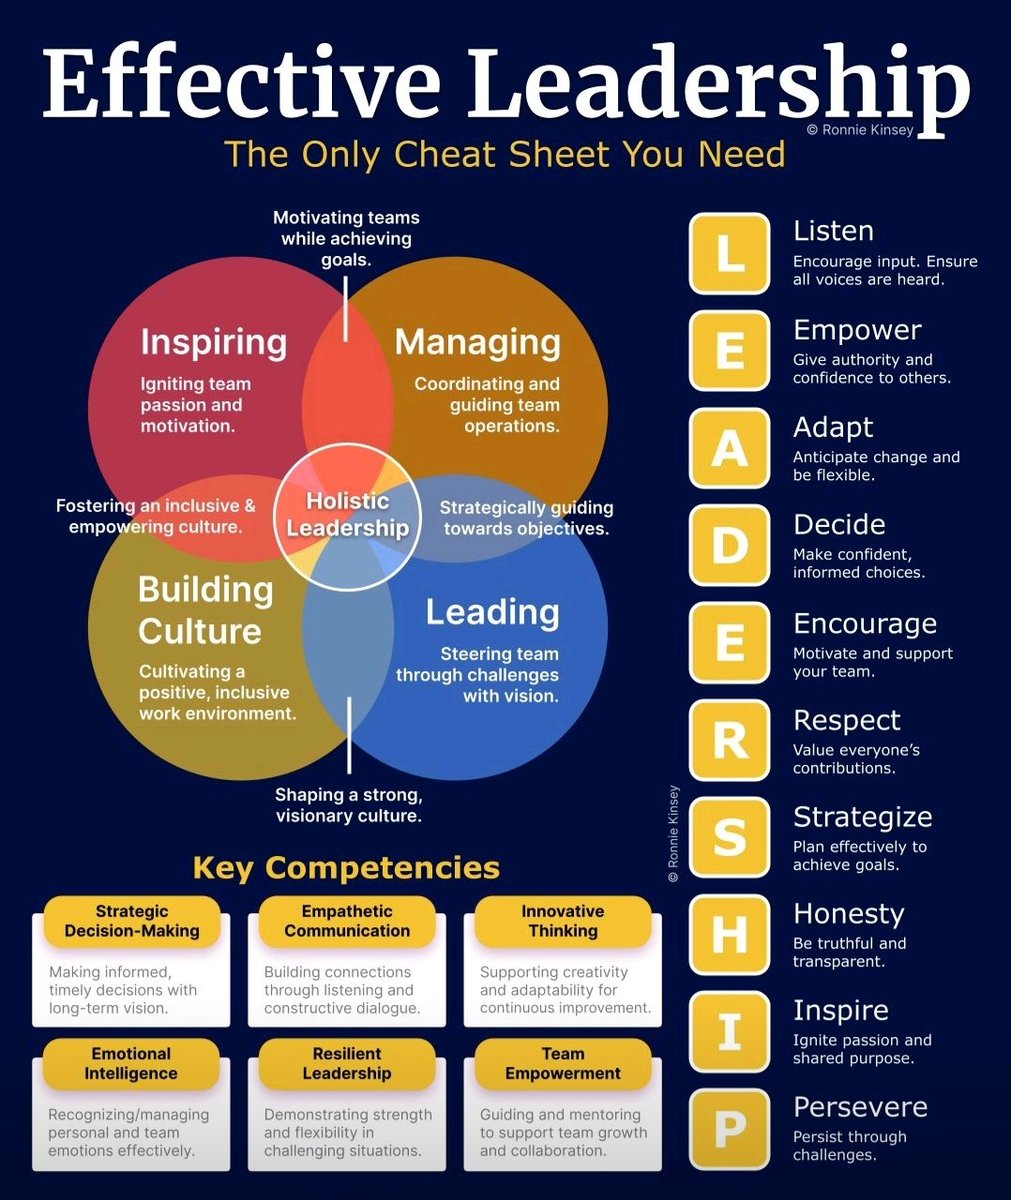 #EffectiveLeadership is all about inspiring, building culture, leading and than managing. Agree?